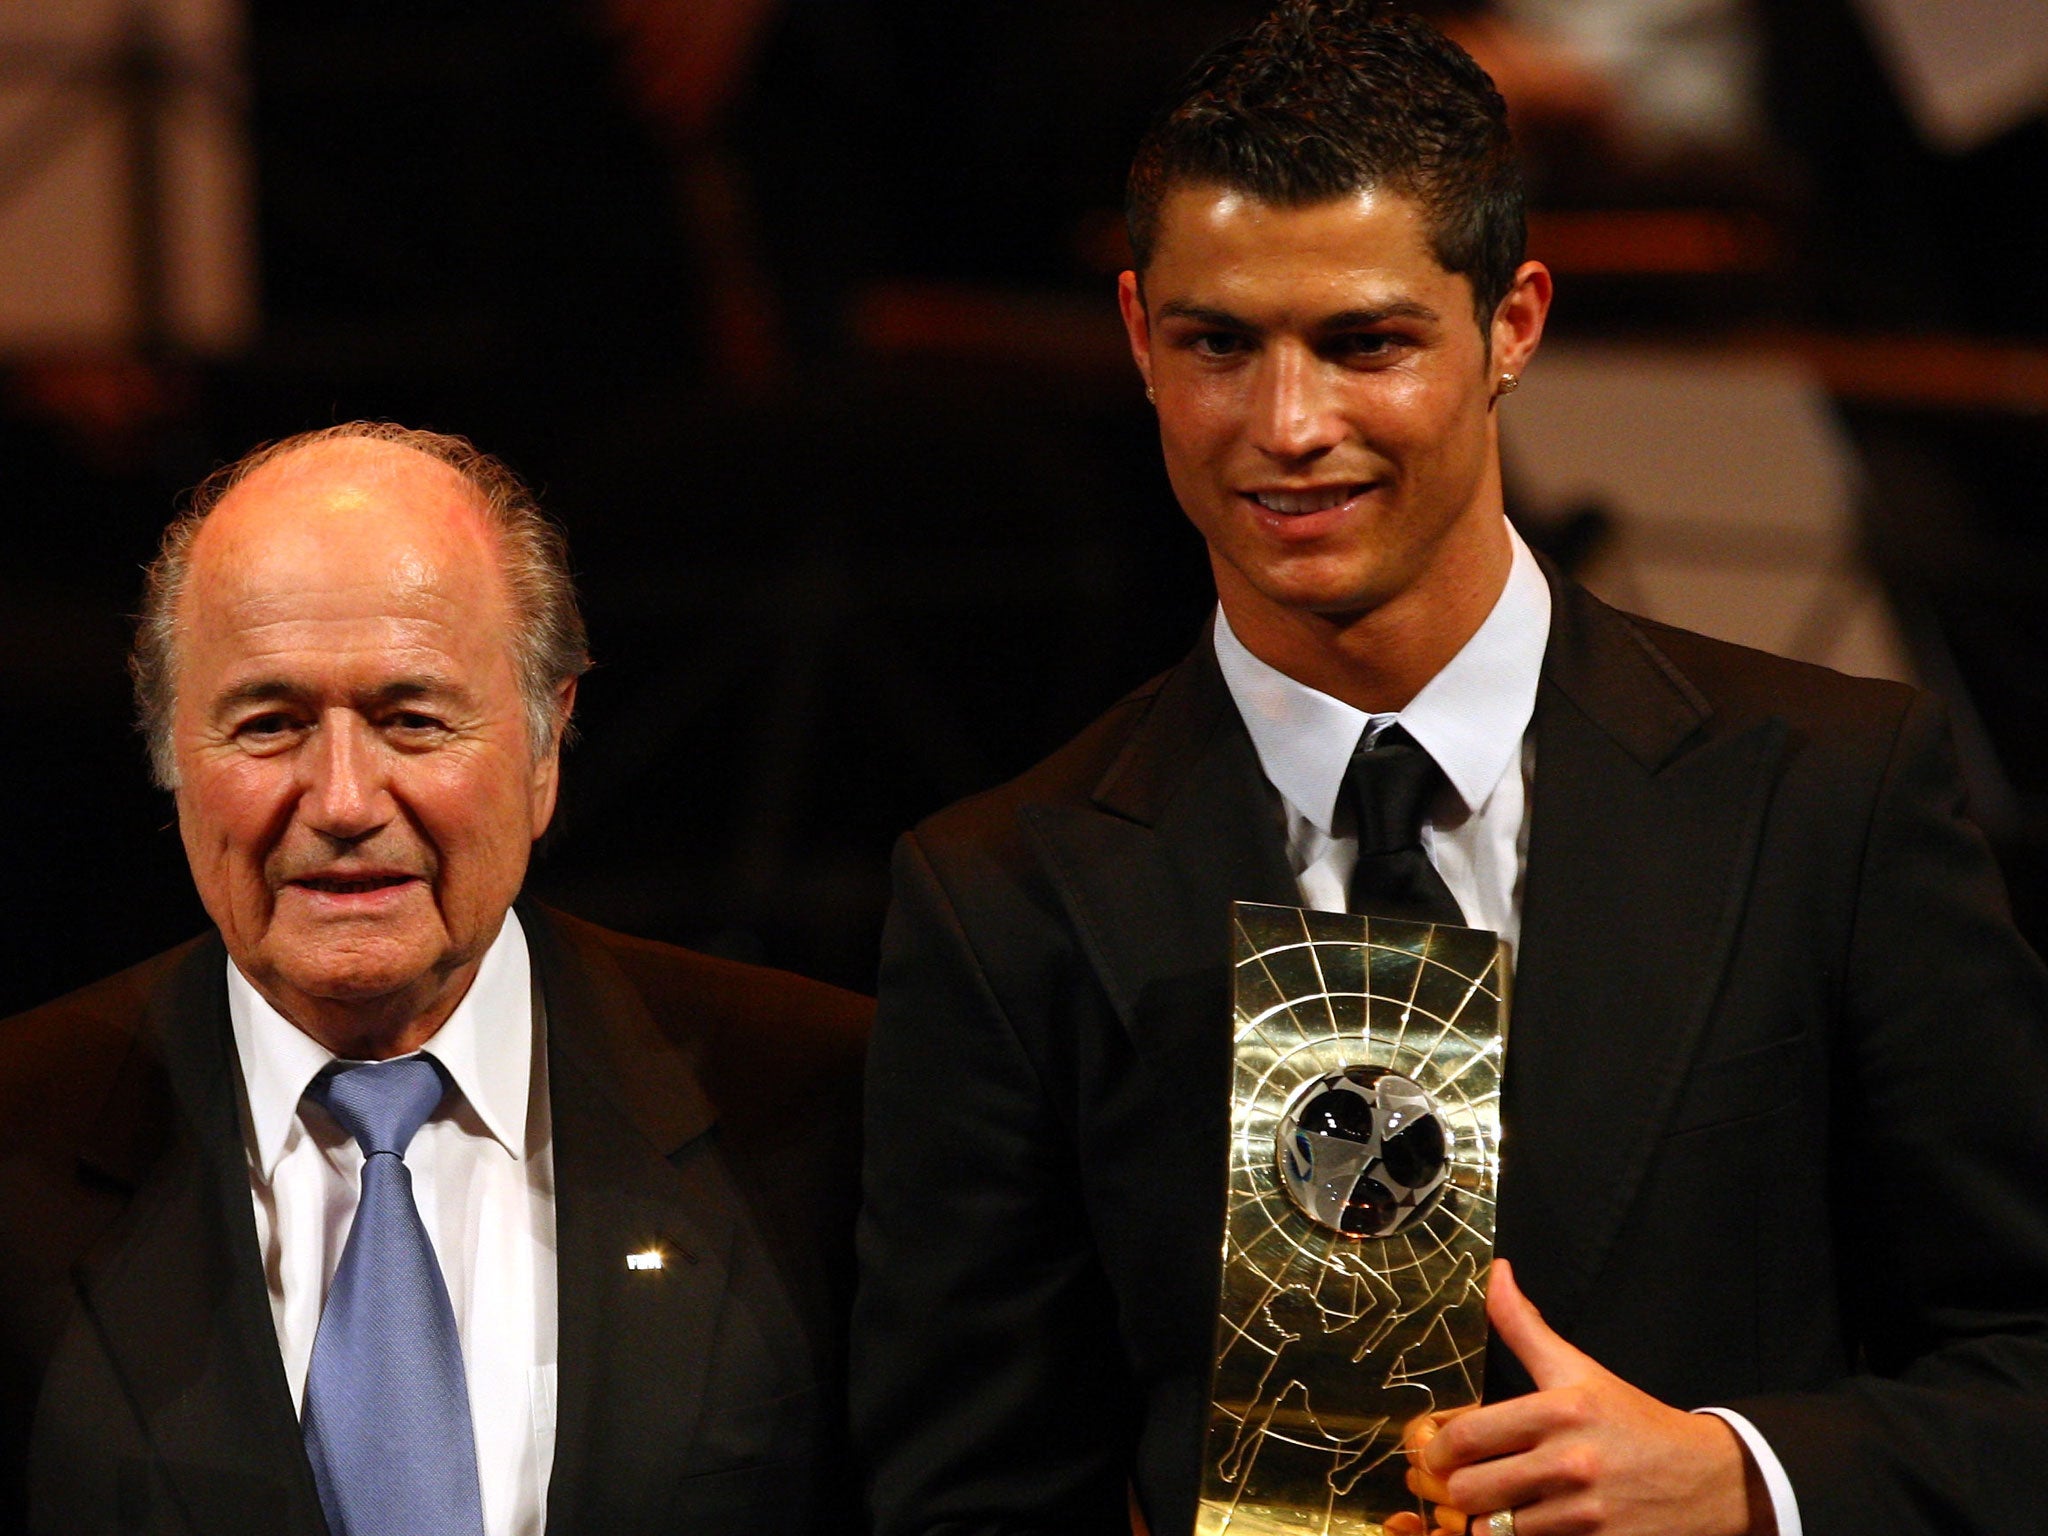 Sepp Blatter (left) poses with Cristiano Ronaldo in January 2009 when he won the Fifa World Player of the Year award for 2008